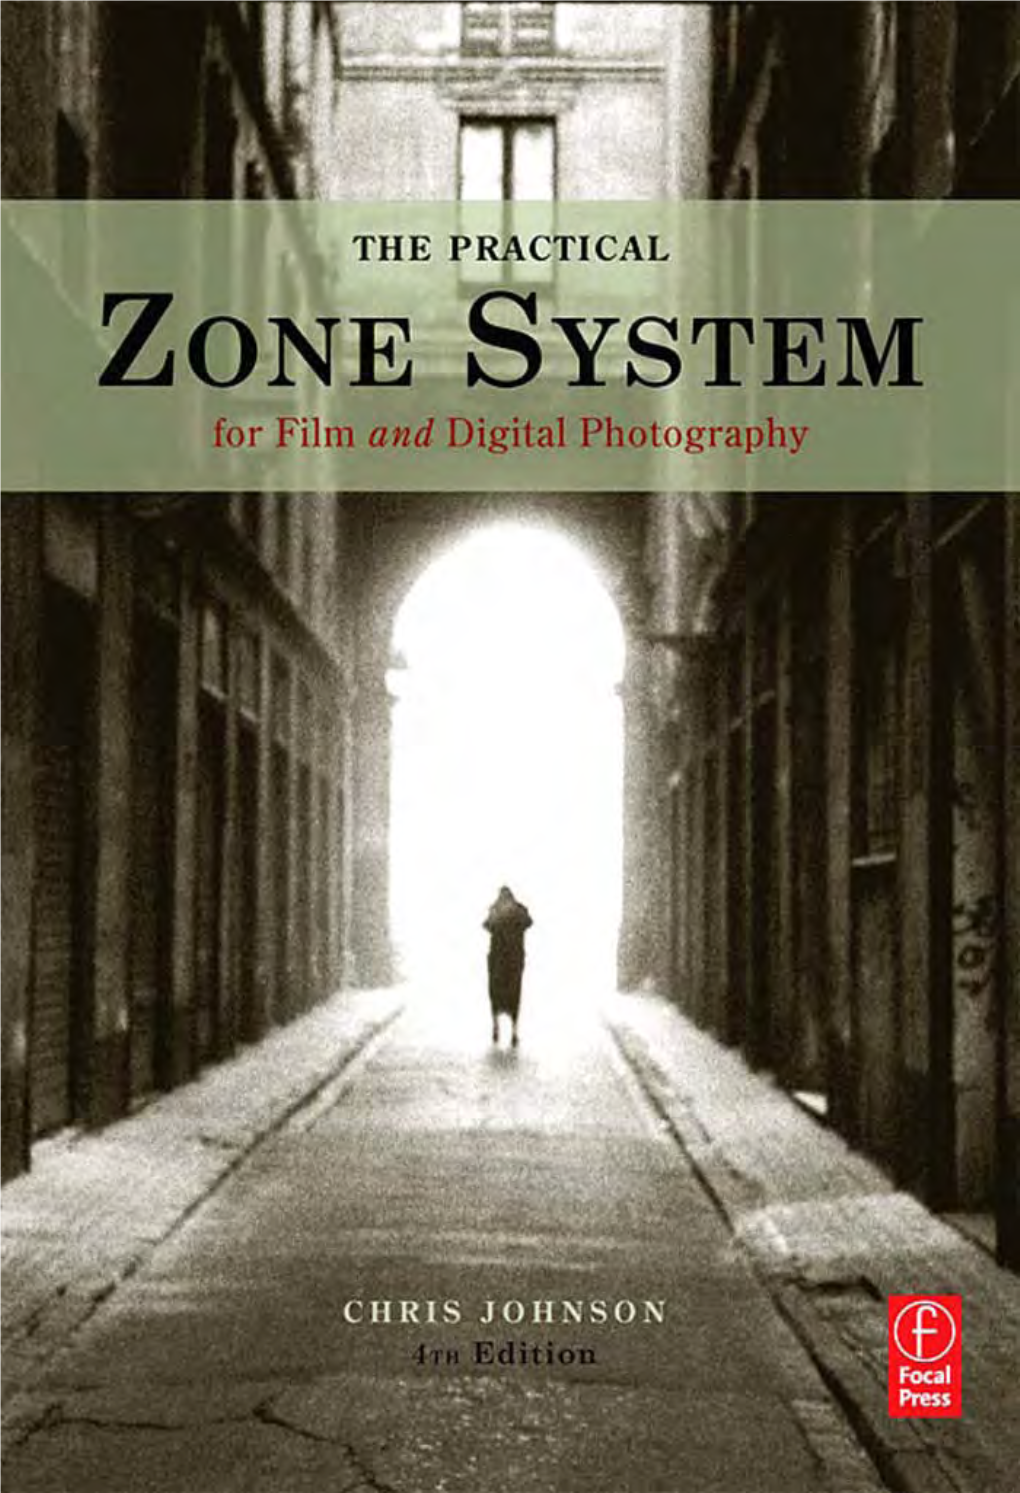 The Practical Zone System, Fourth Edition